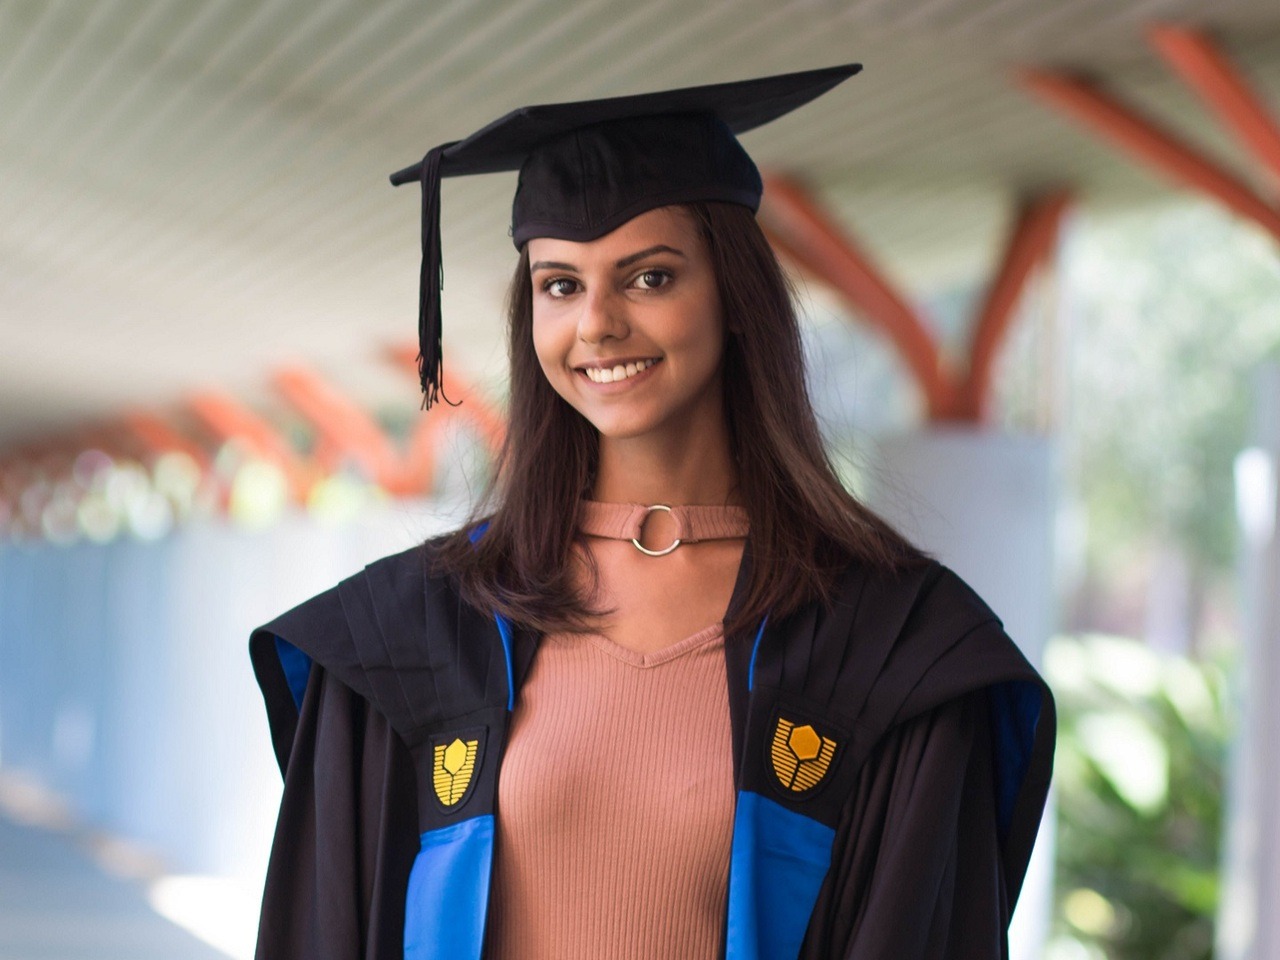 “I’ve always dreaded assignments and deadlines, but today, it’s a whole new ball game in the working world where they are the least of my problems. I’m so glad Curtin Malaysia gave me more than just textbook learning but the freedom to take risks and...